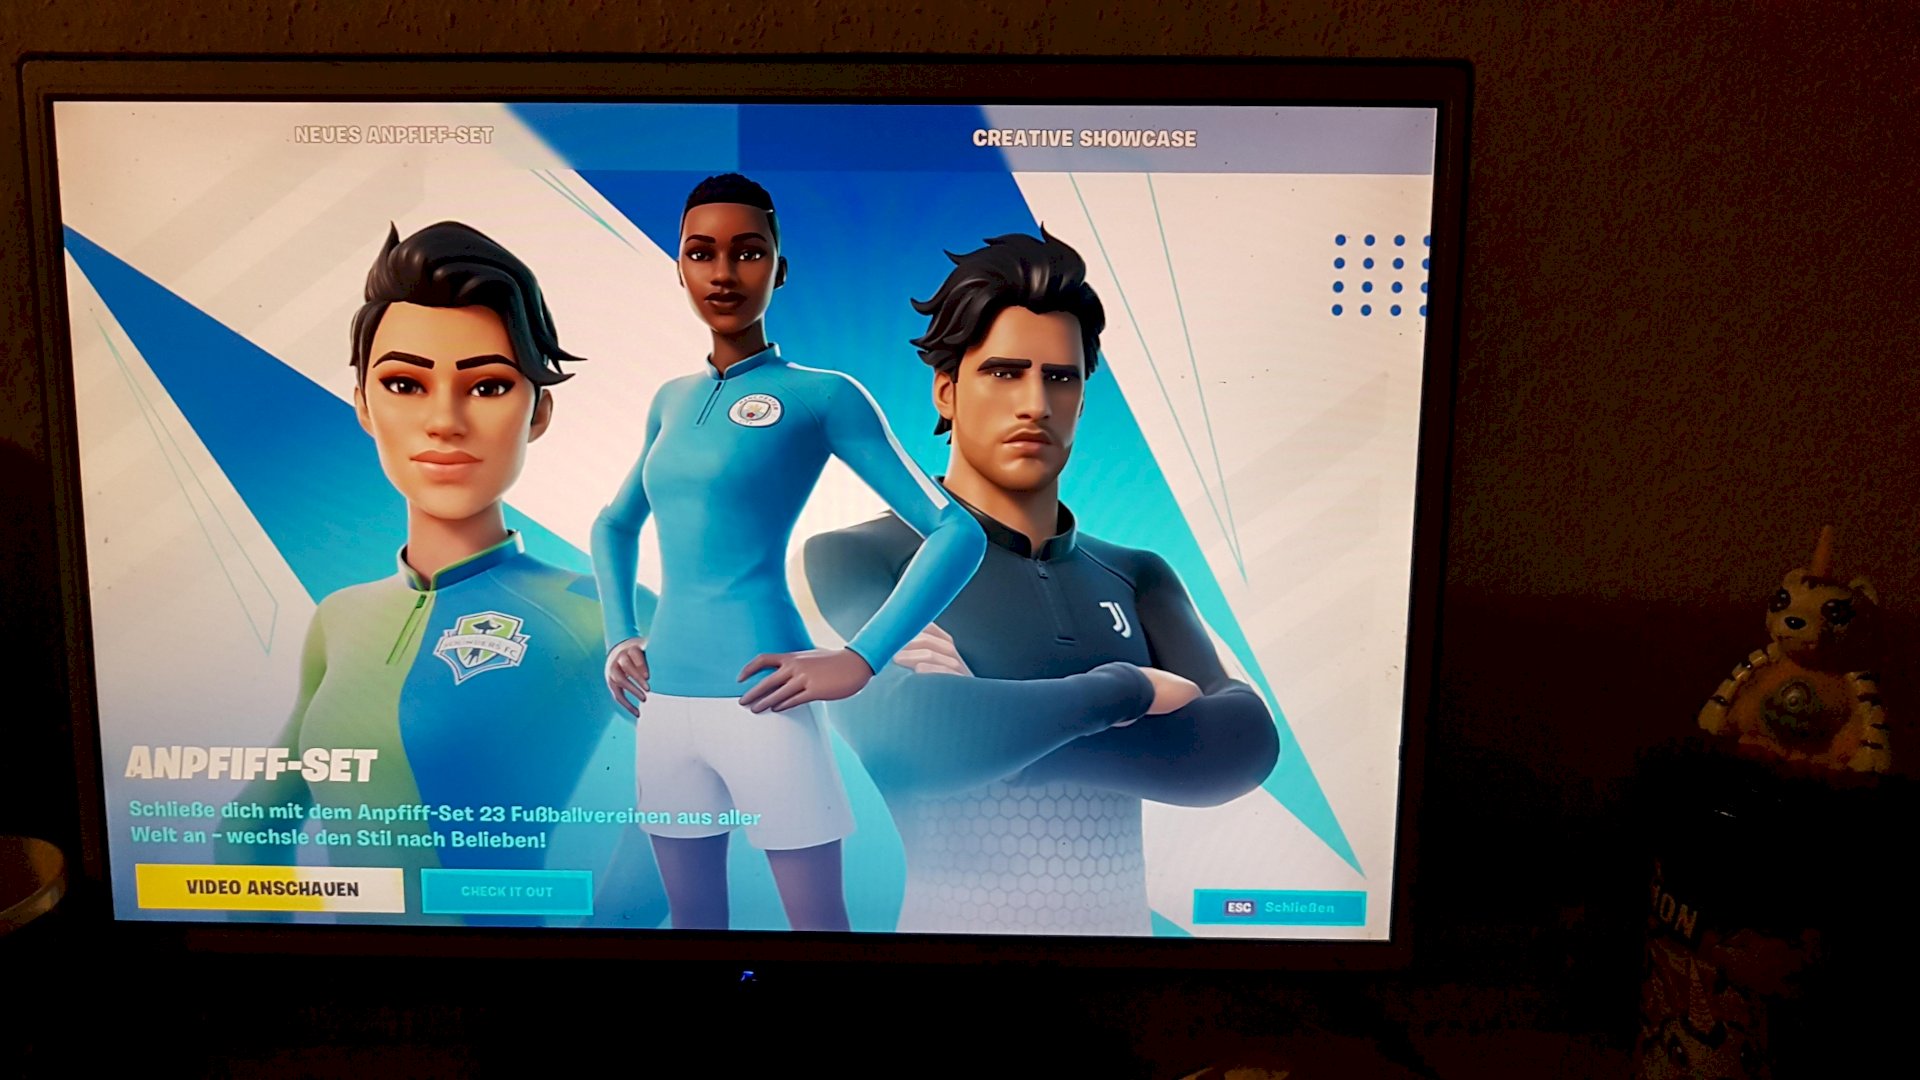 Fortnite cooperation with football clubs